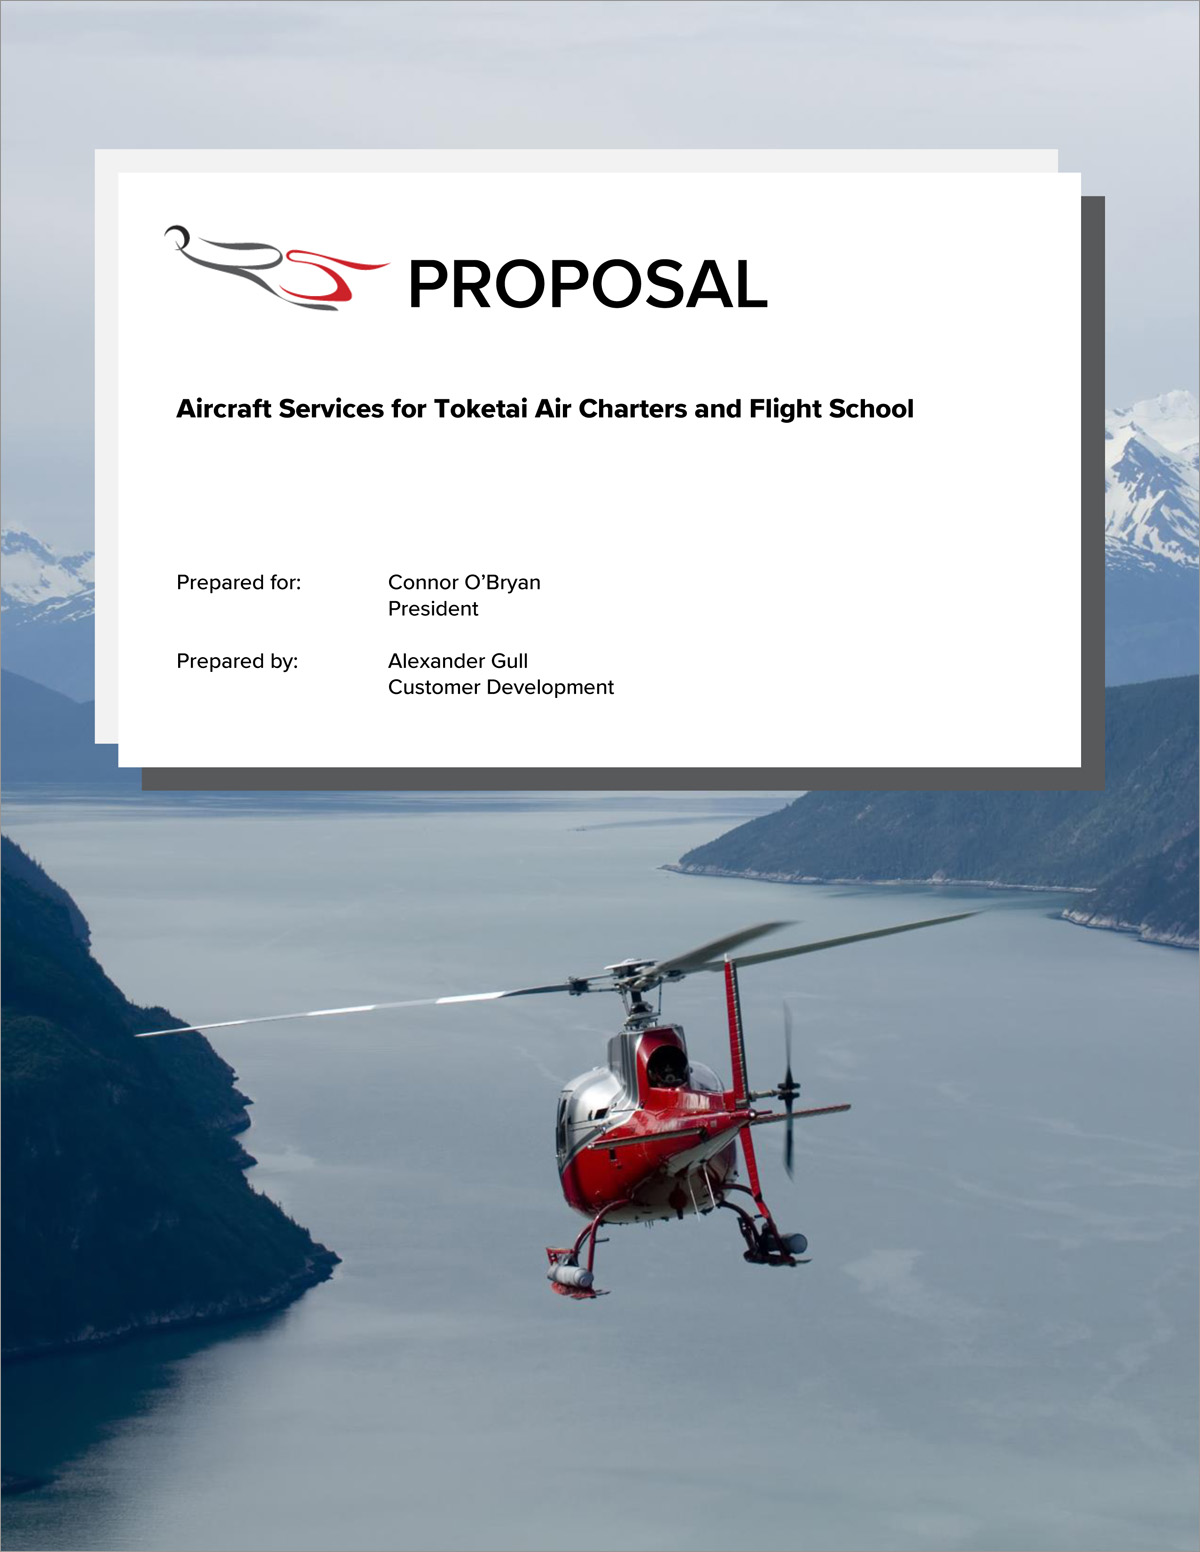 research proposal topics in aviation industry